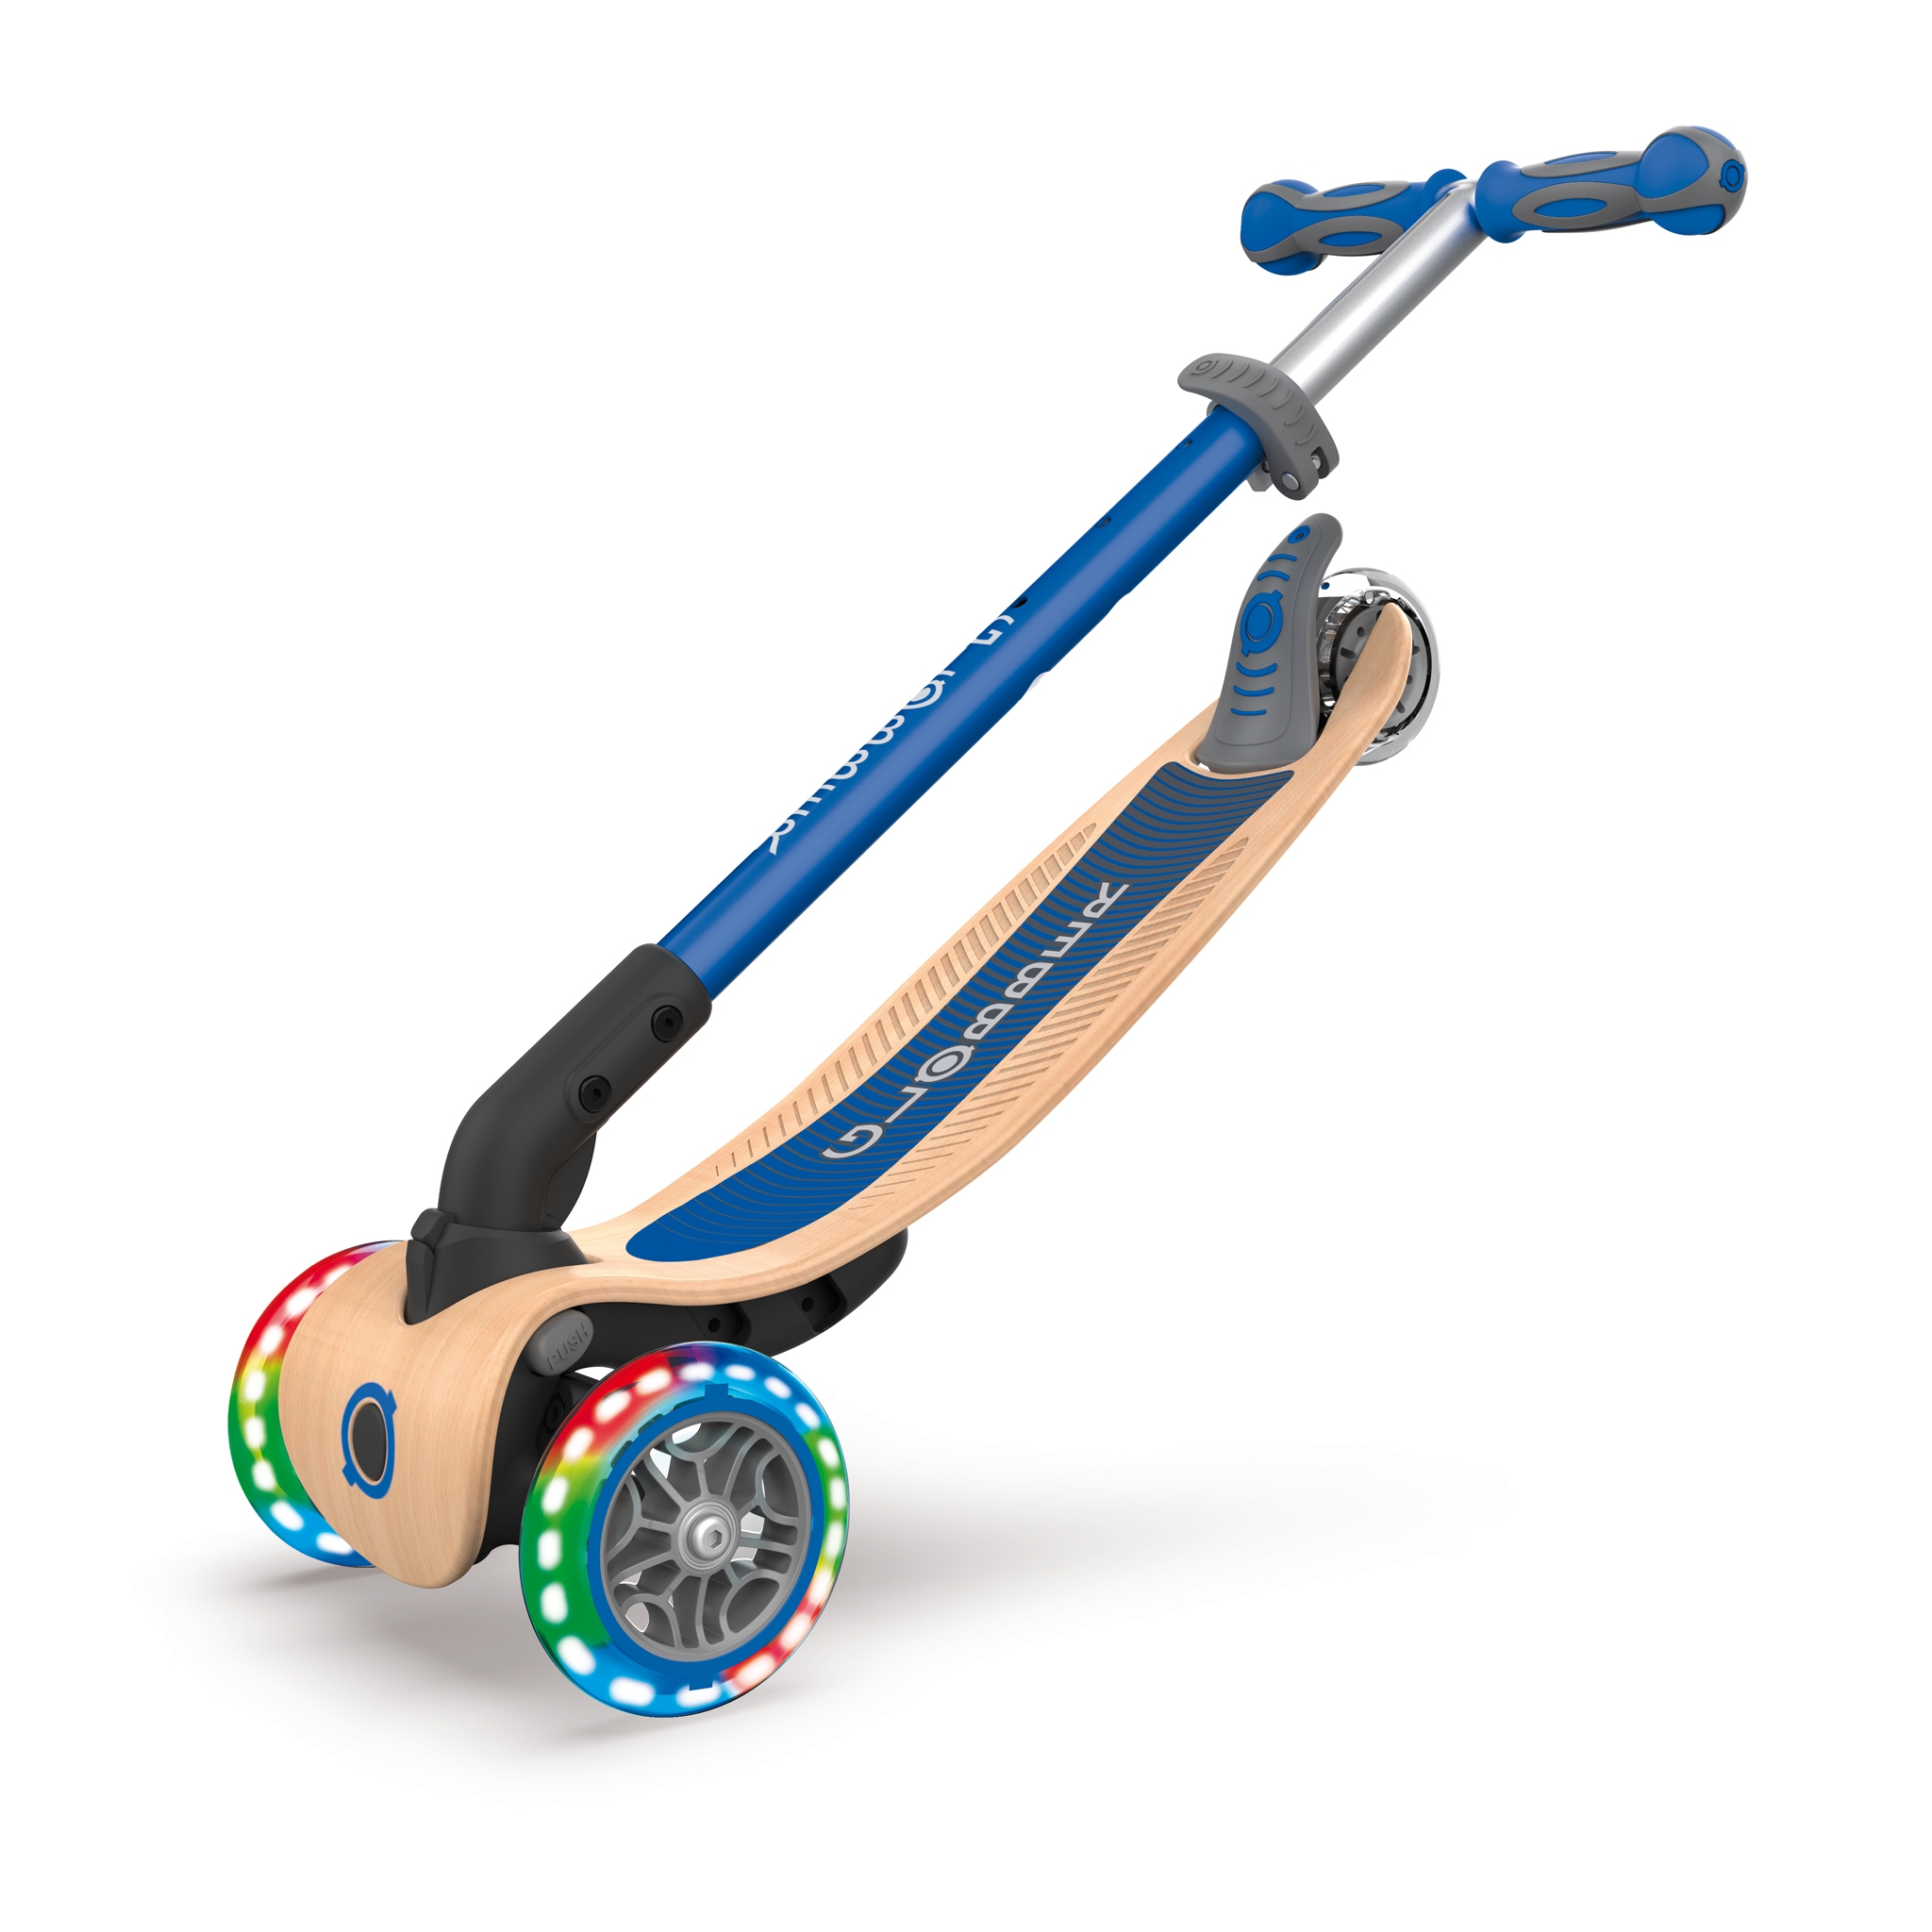 PRIMO-FOLDABLE-WOOD-LIGHTS-3-wheel-foldable-light-up-scooter-with-7-ply-wooden-scooter-deck-trolley-mode-compatible_navy-blue 5